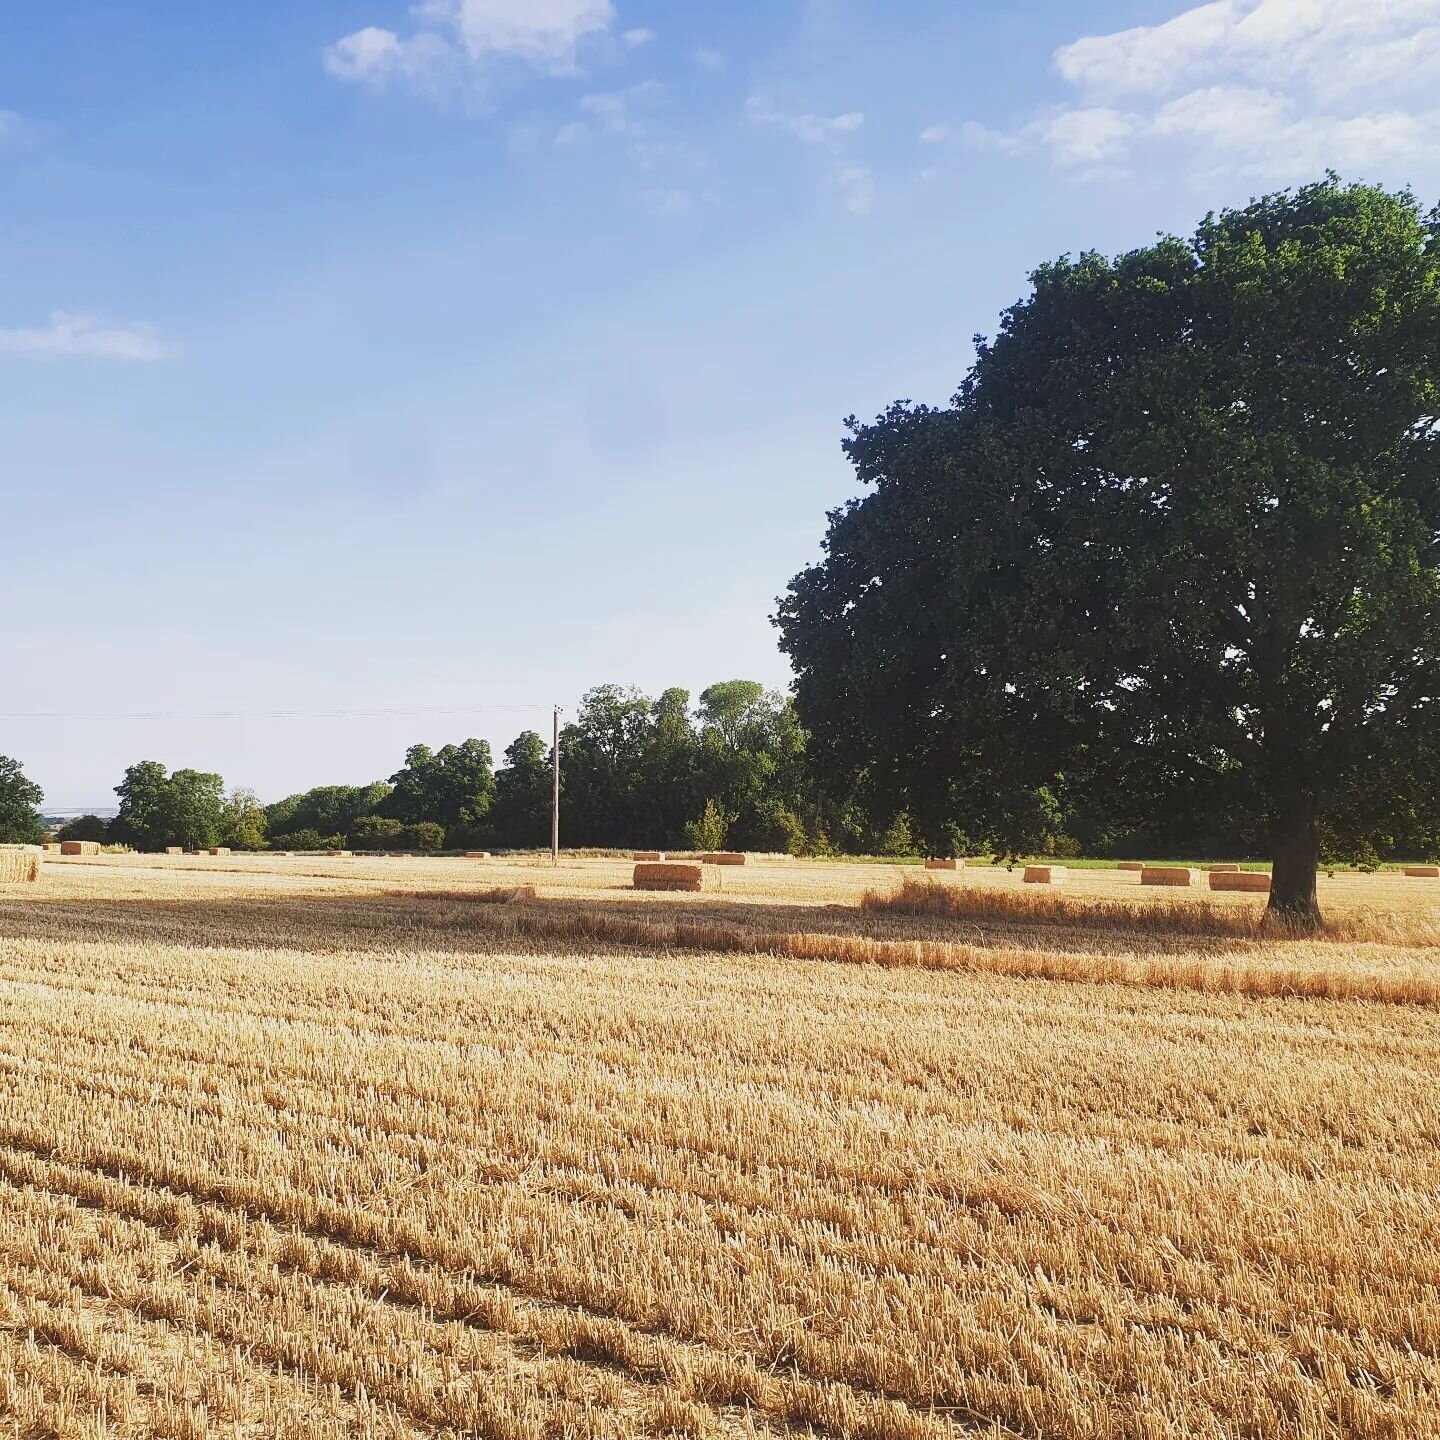 🇬🇧 Many people do not actually enjoy their surroundings at work, but not us! How fortunate are we to be able to use thousands of acres of Great British countryside as our workplace?! 😎😎